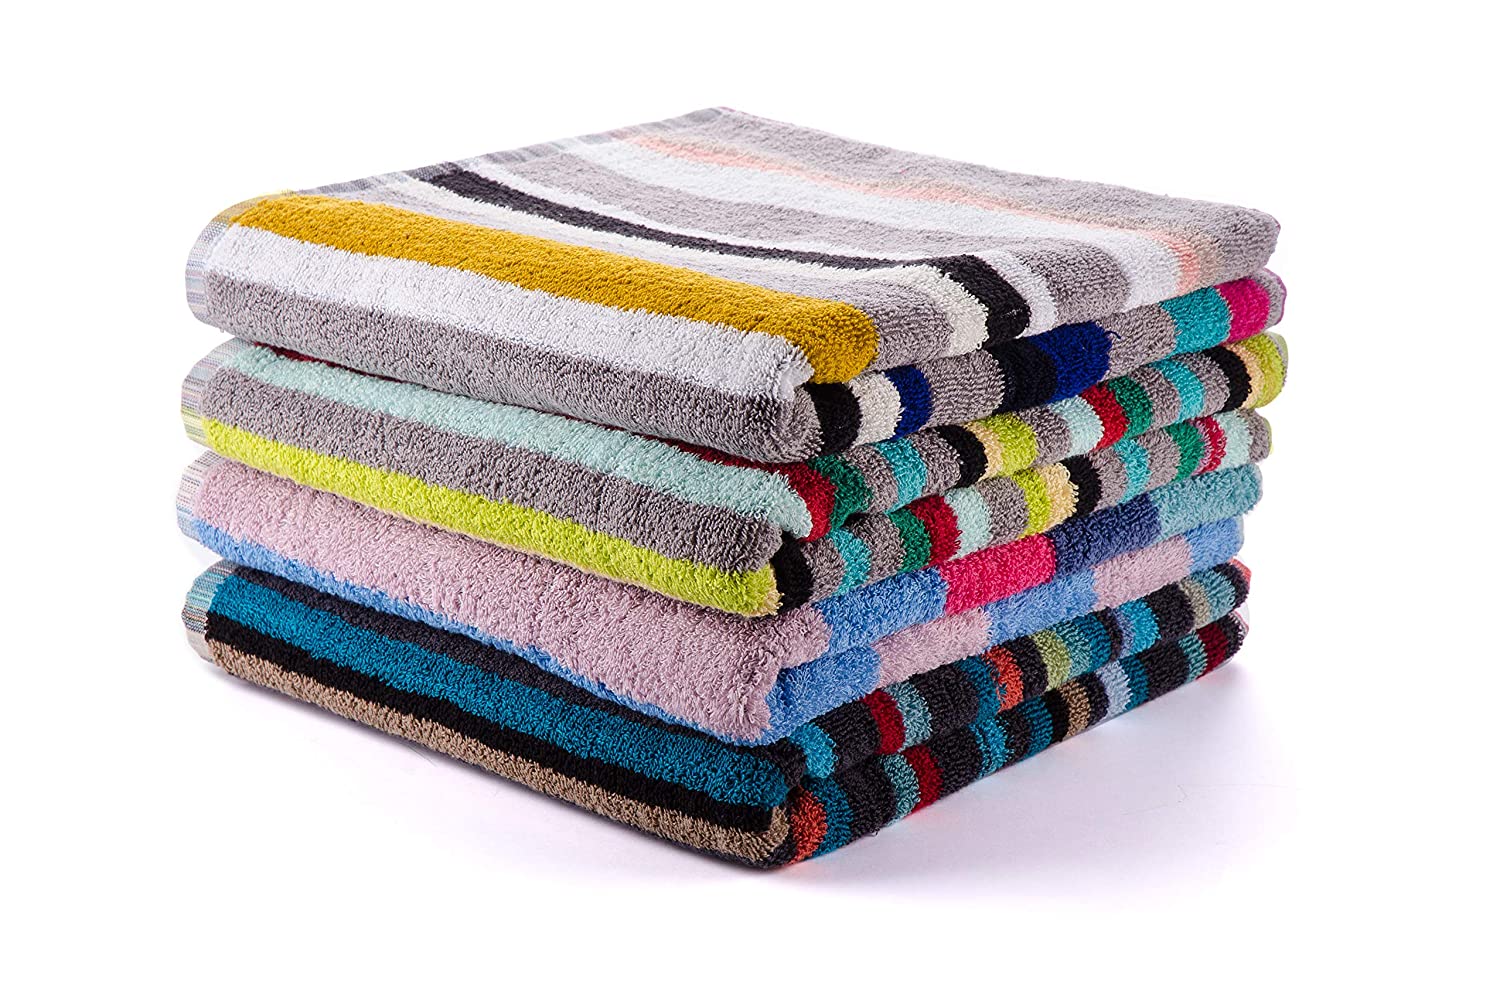 What Factors Determine the Quality of Your Bath Towel